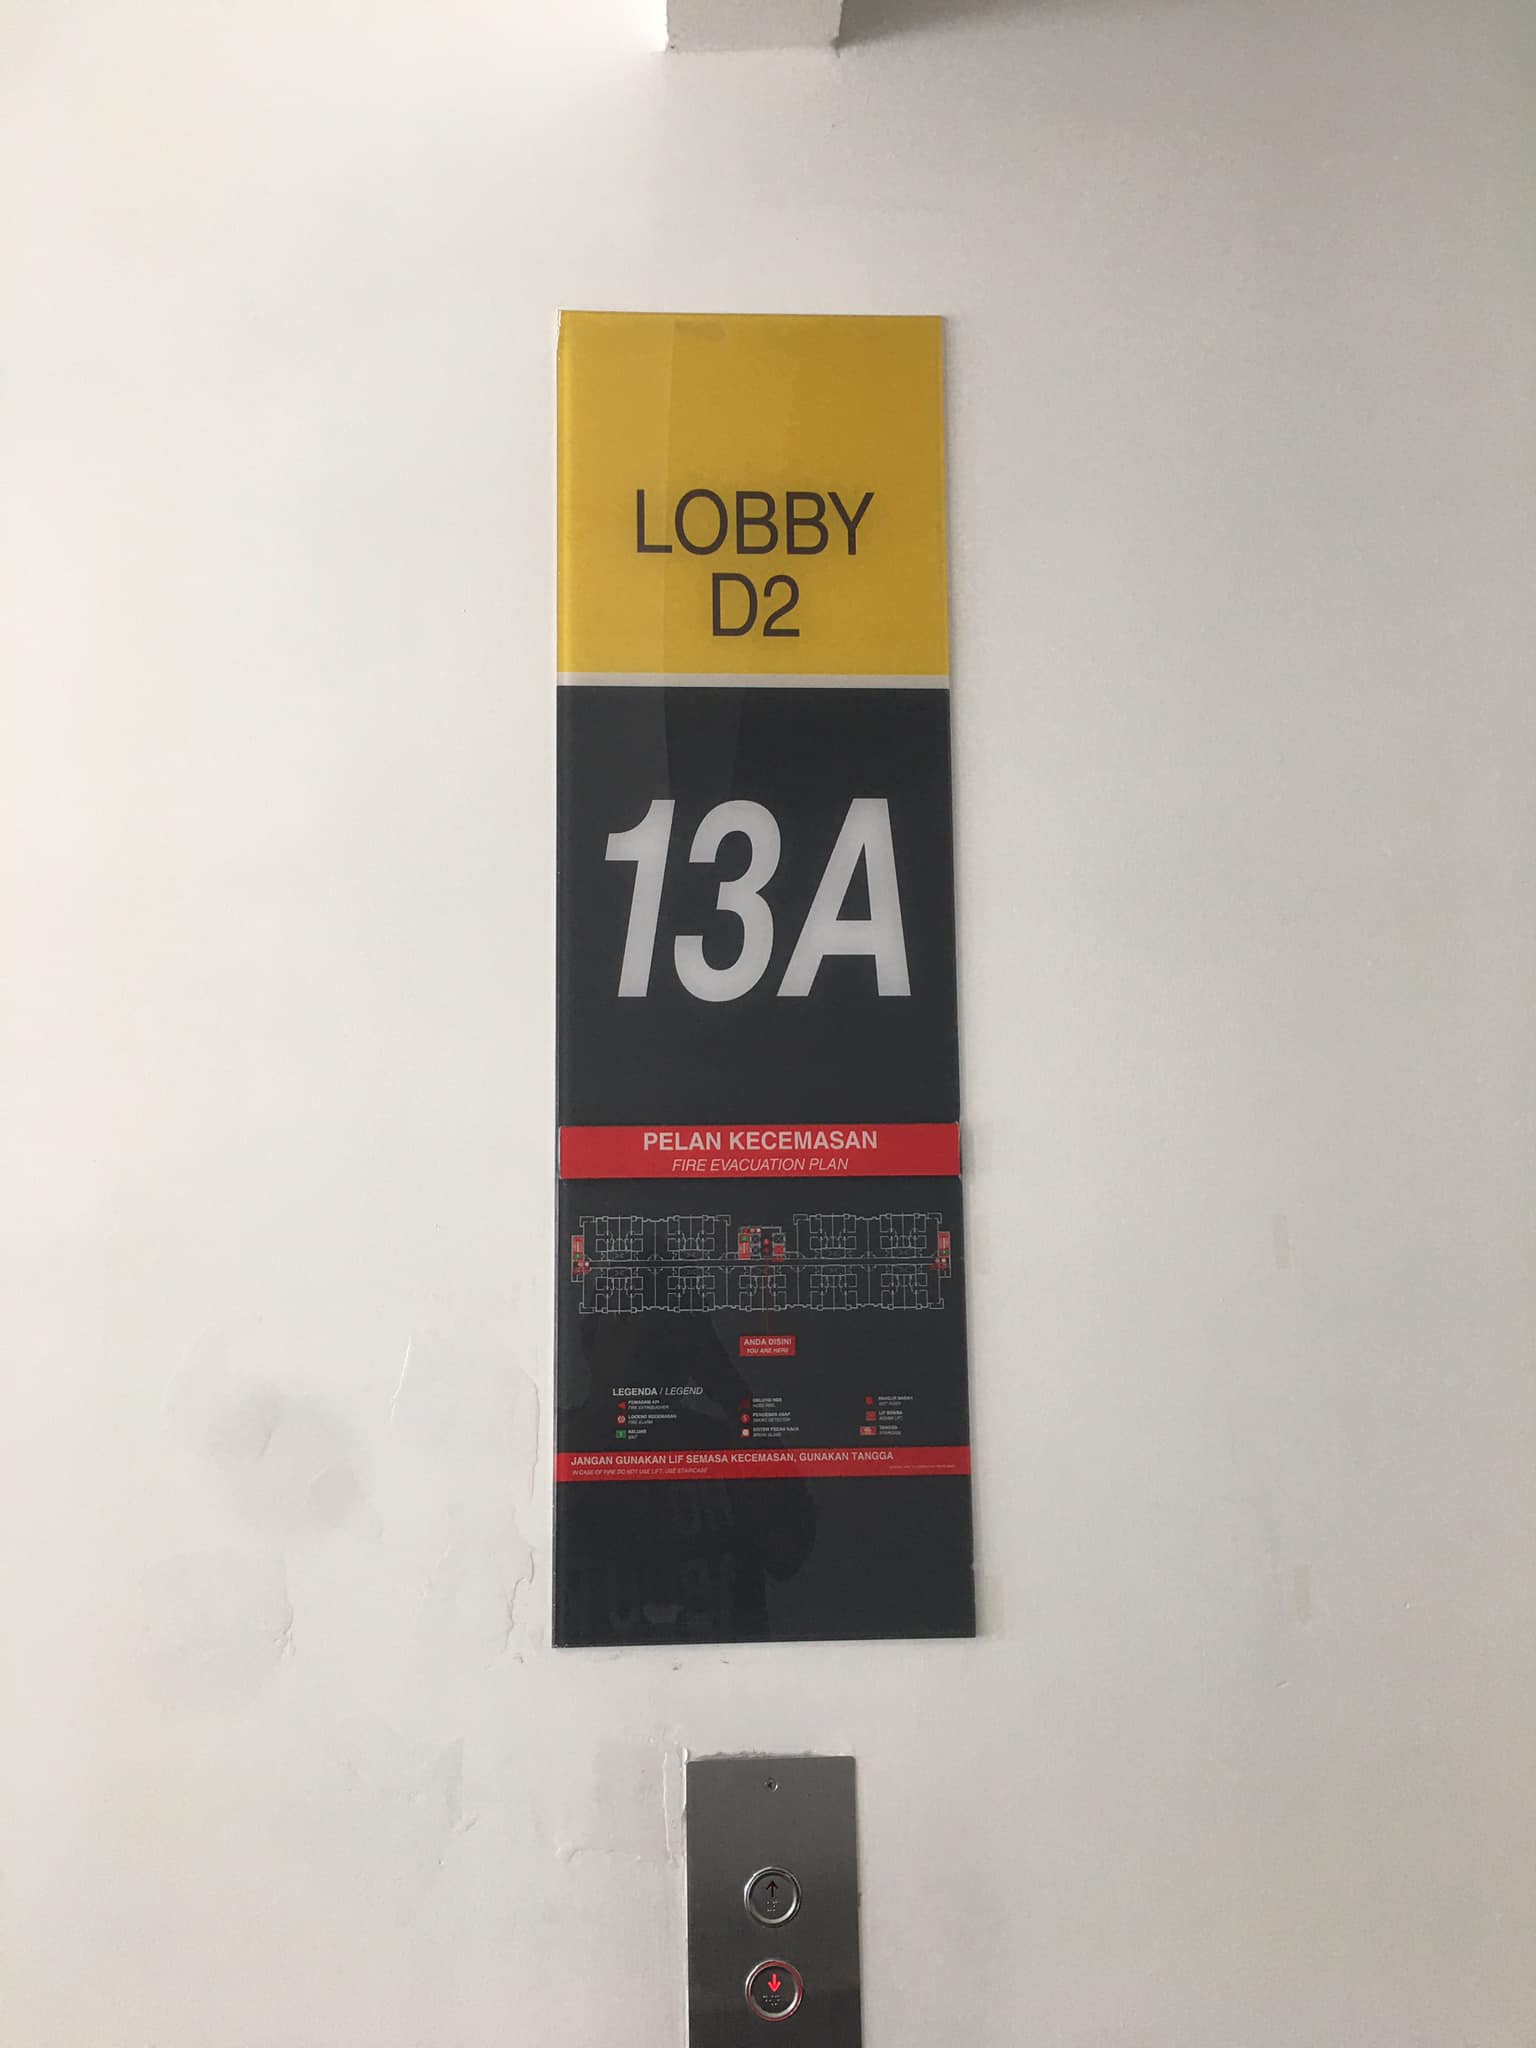 Building signboard showing 14th floor as 13a